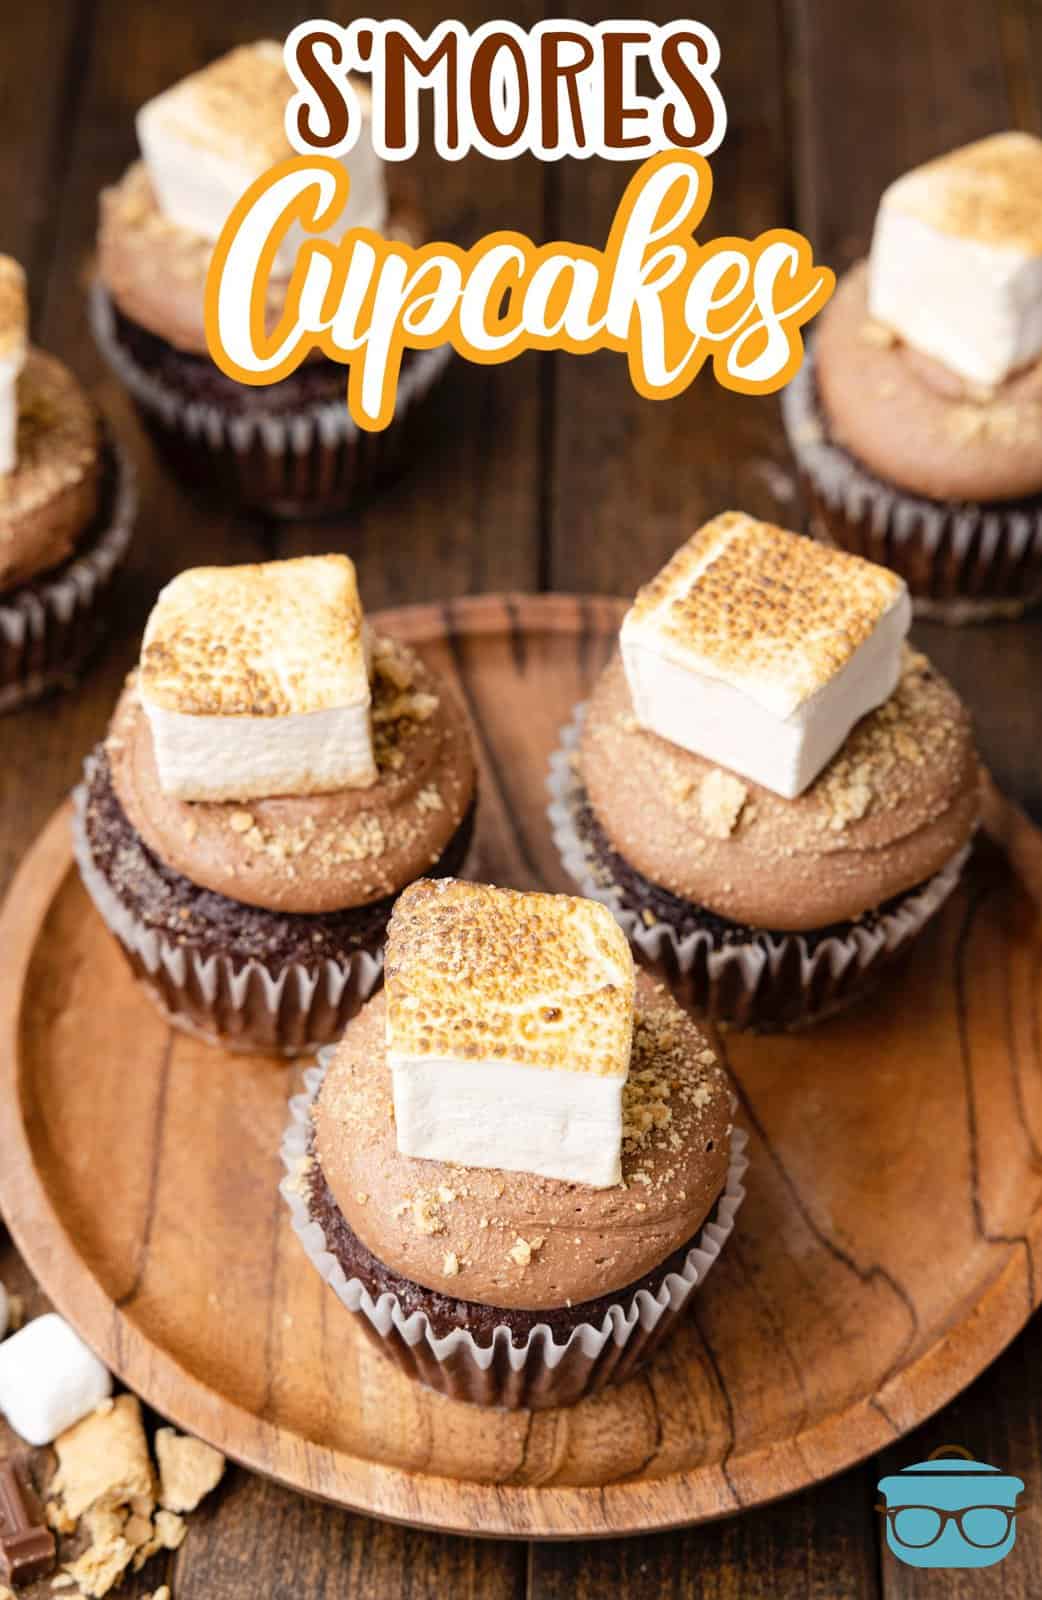 Overhead of S'mores Cupcakes on wooden board with some in background, Pinterest image.